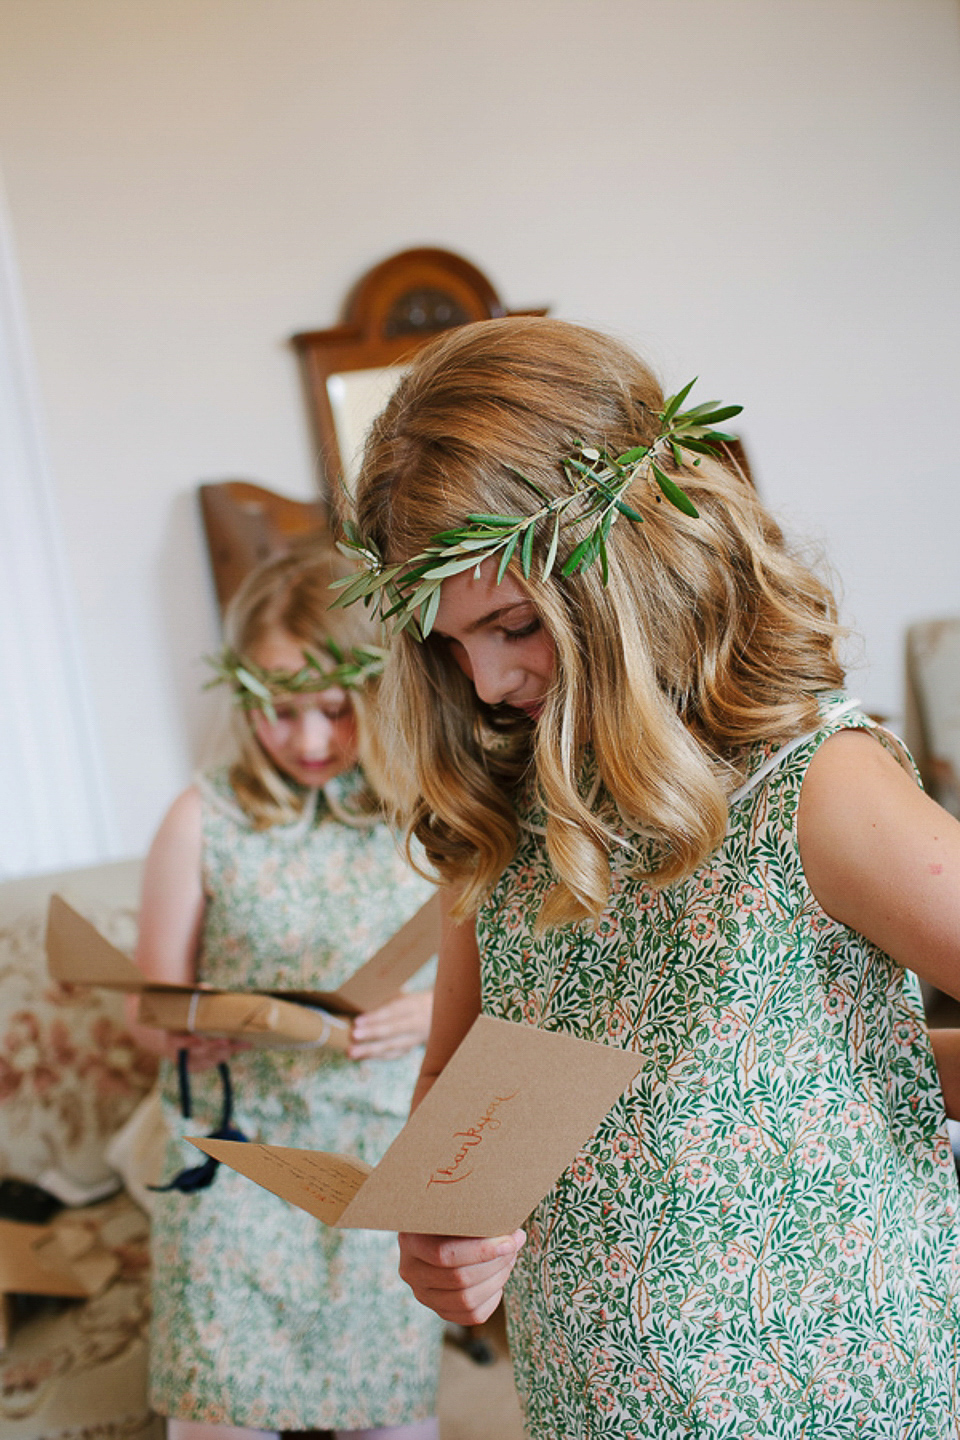 A 60's inspired gown for a Garden Party Wedding. Photography by Joanna Brown.